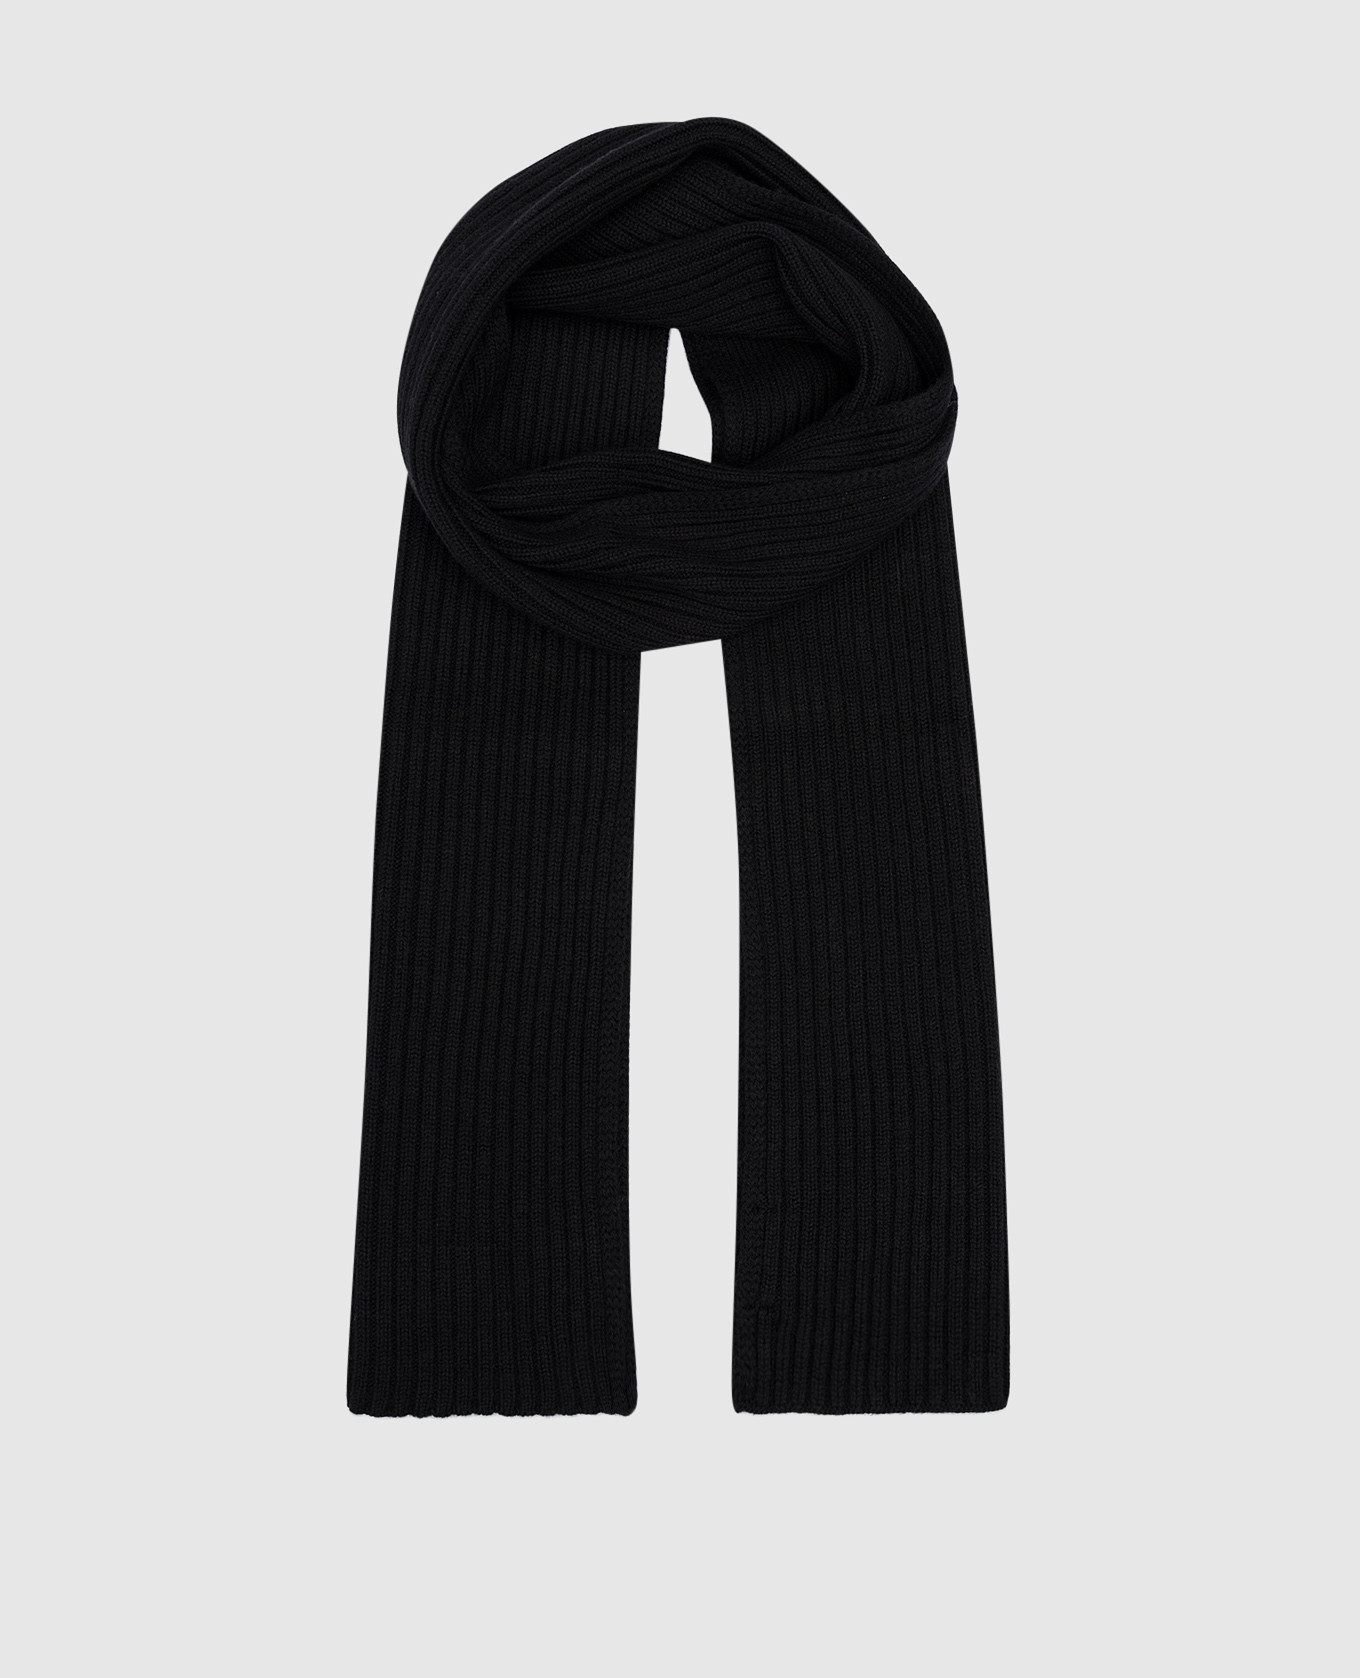 A black scarf with a scar made of merino wool